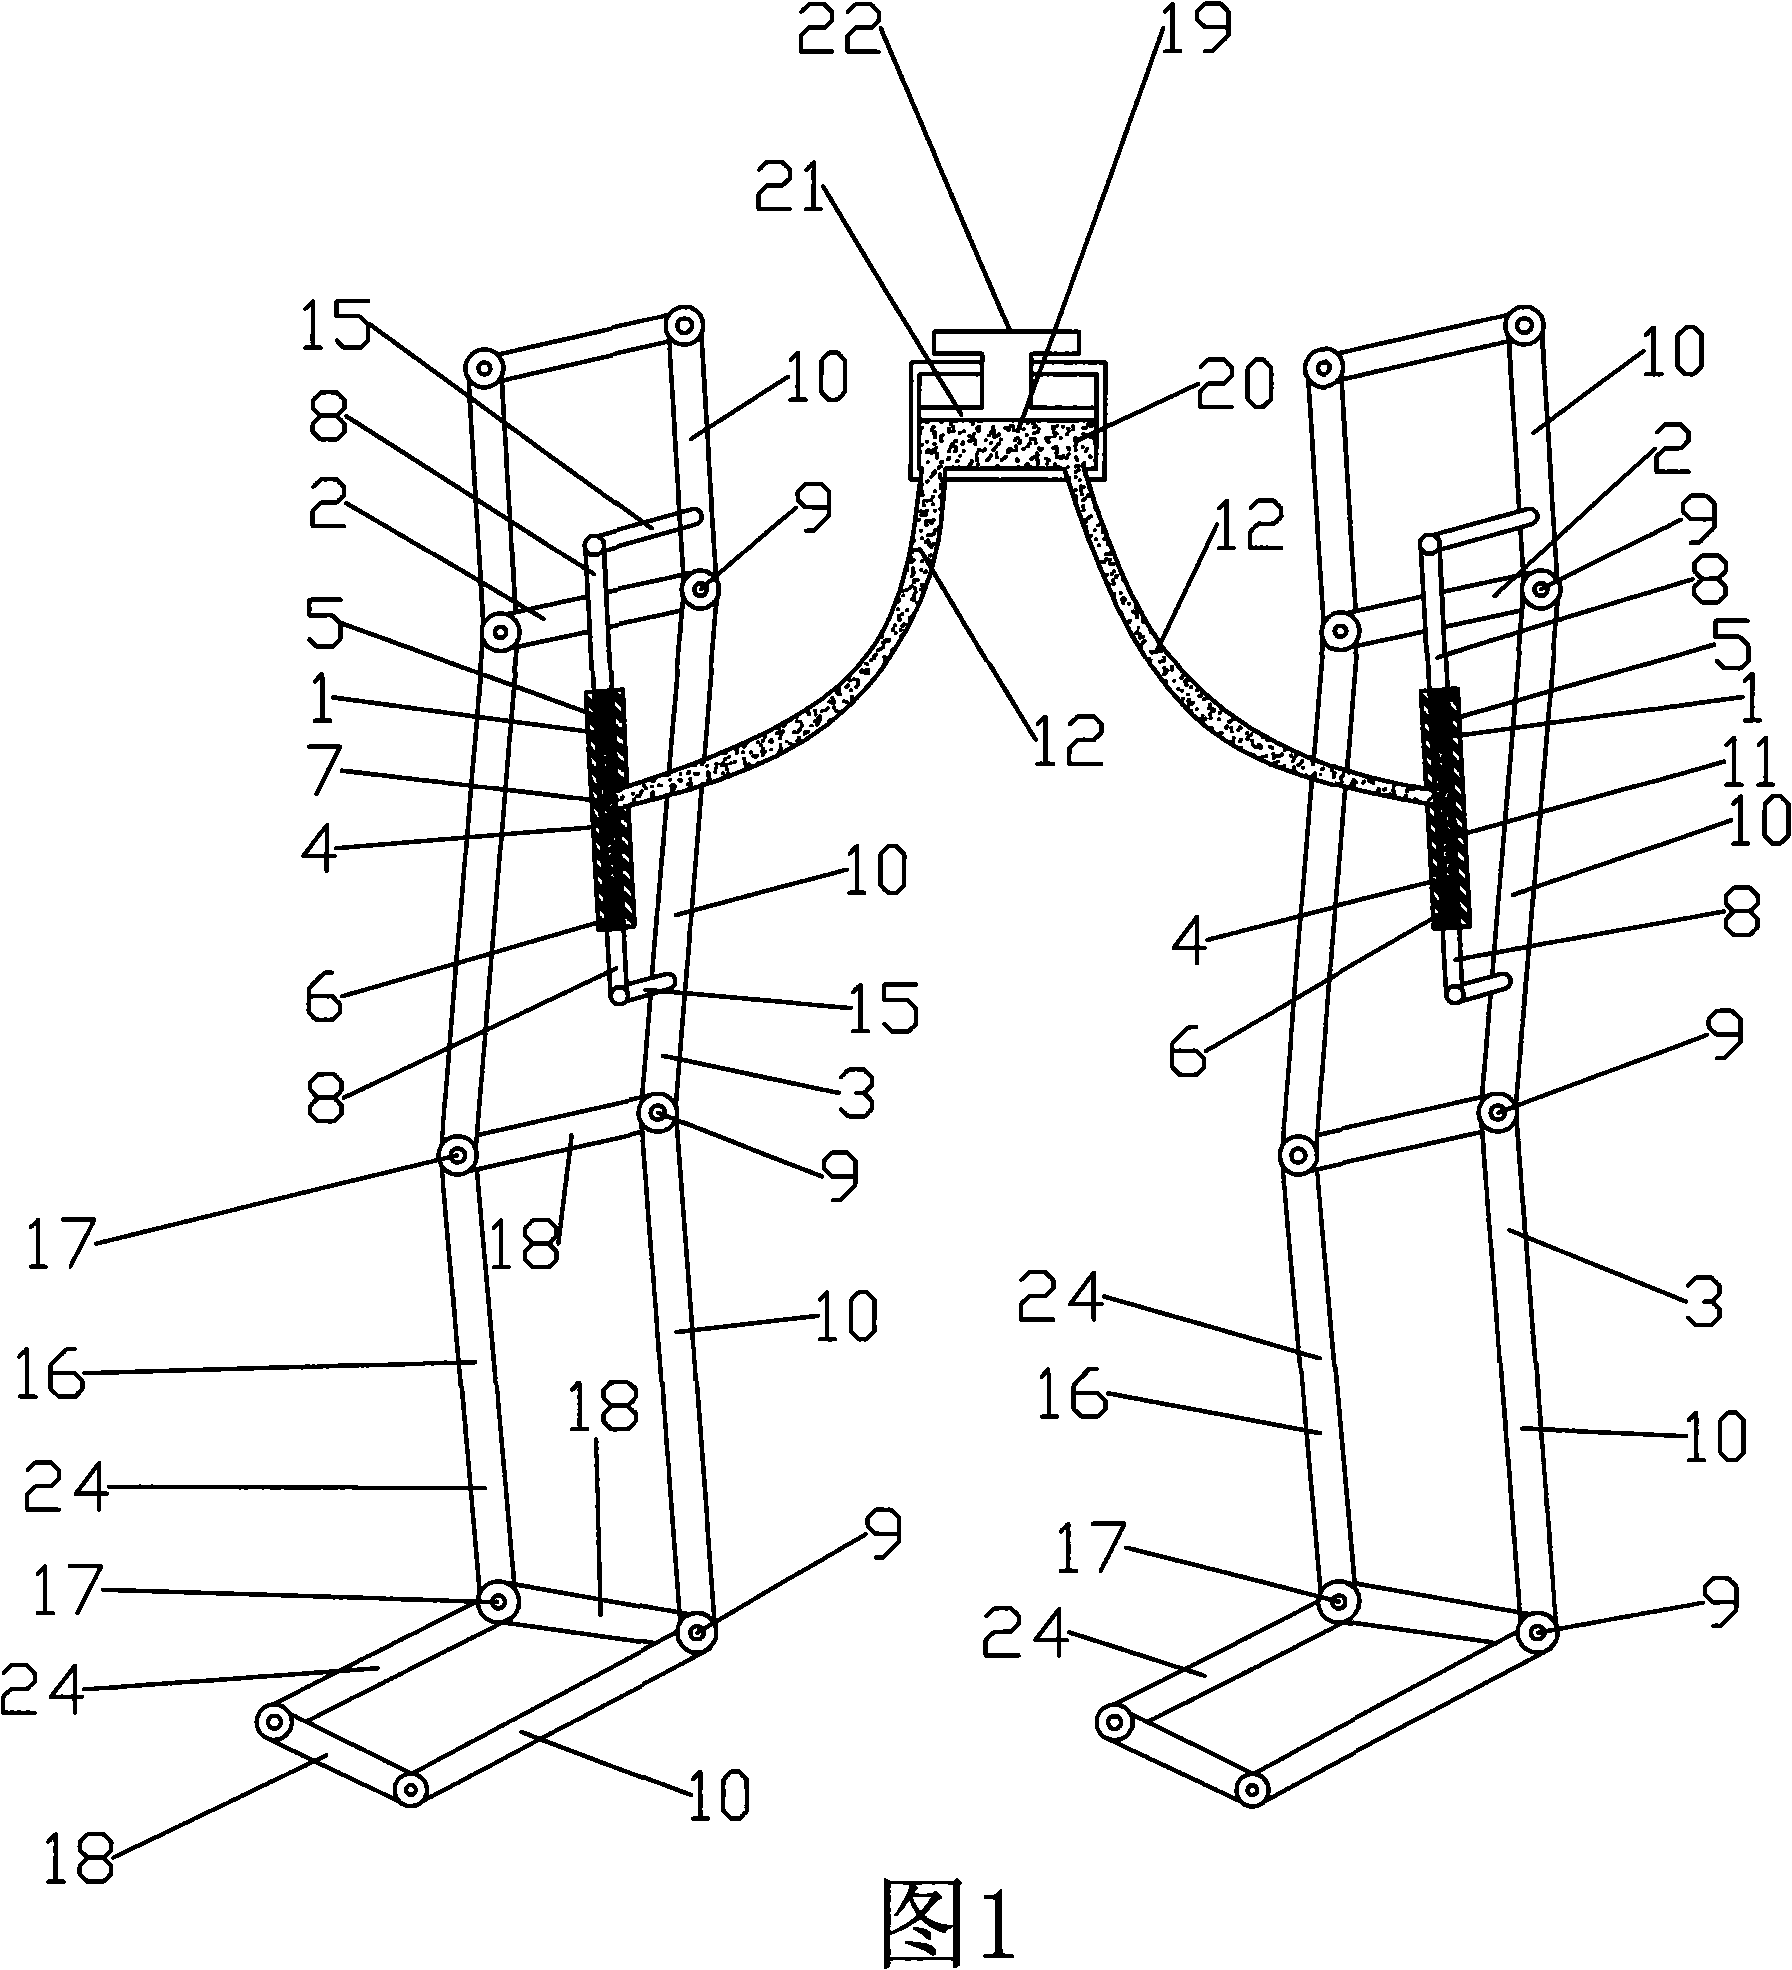 Device for recovery of paralyzed limbs